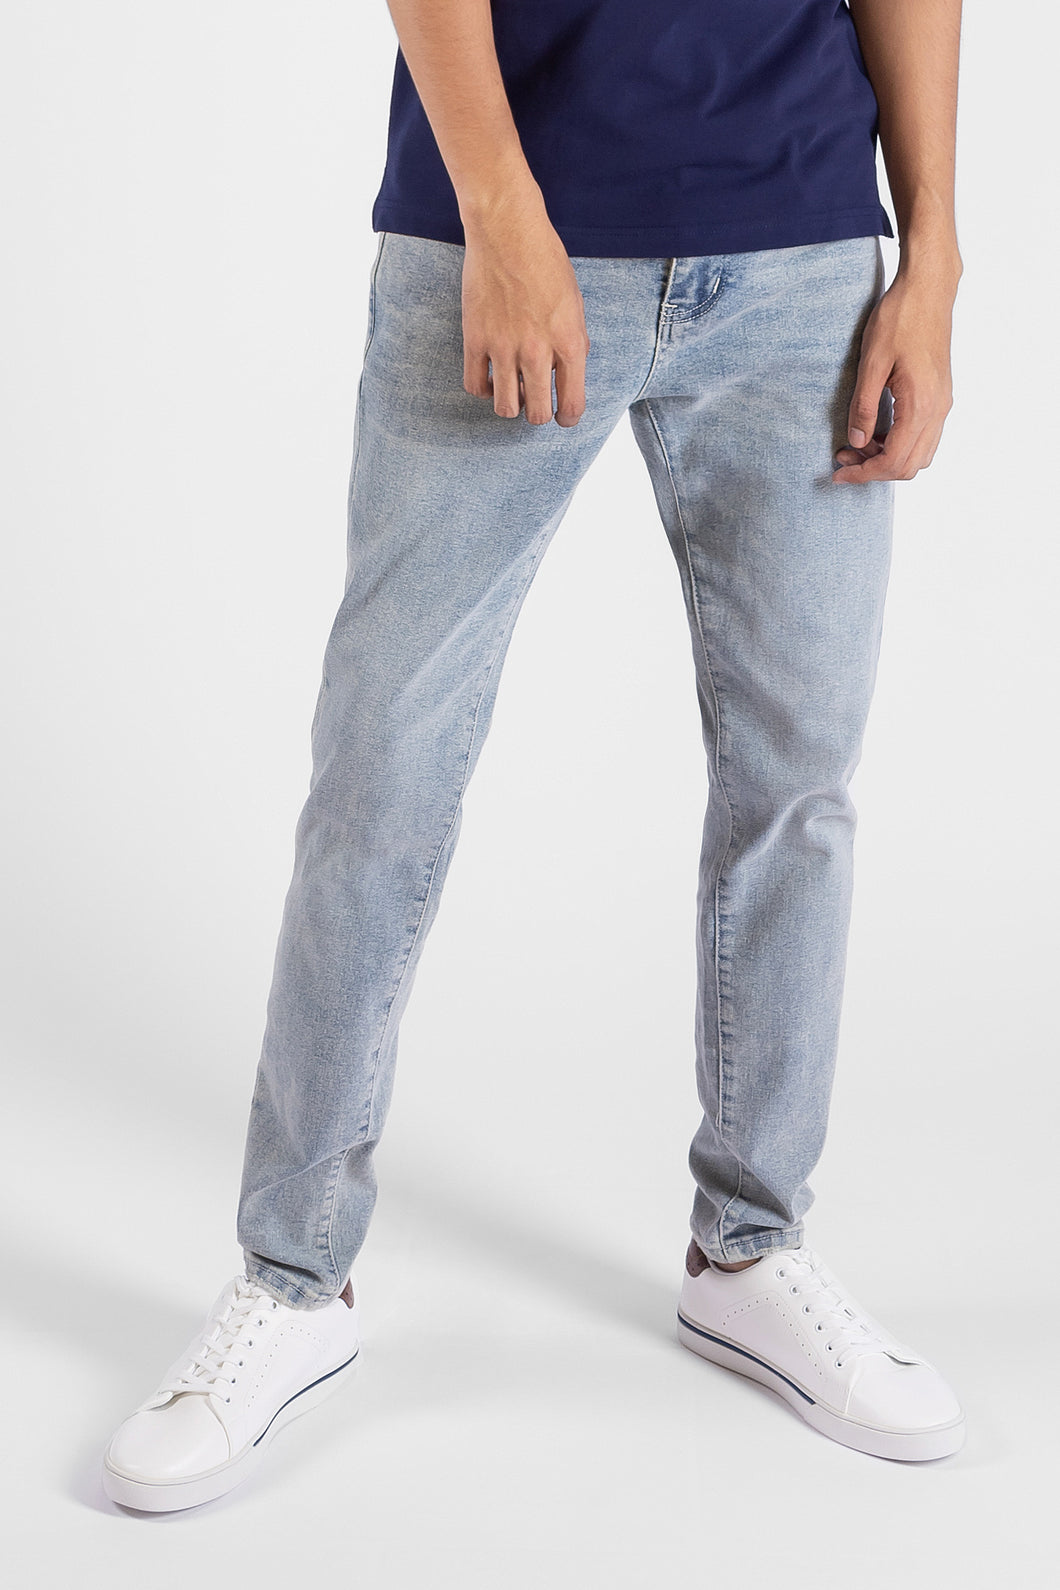 Jean Skinny Fit - Hombre